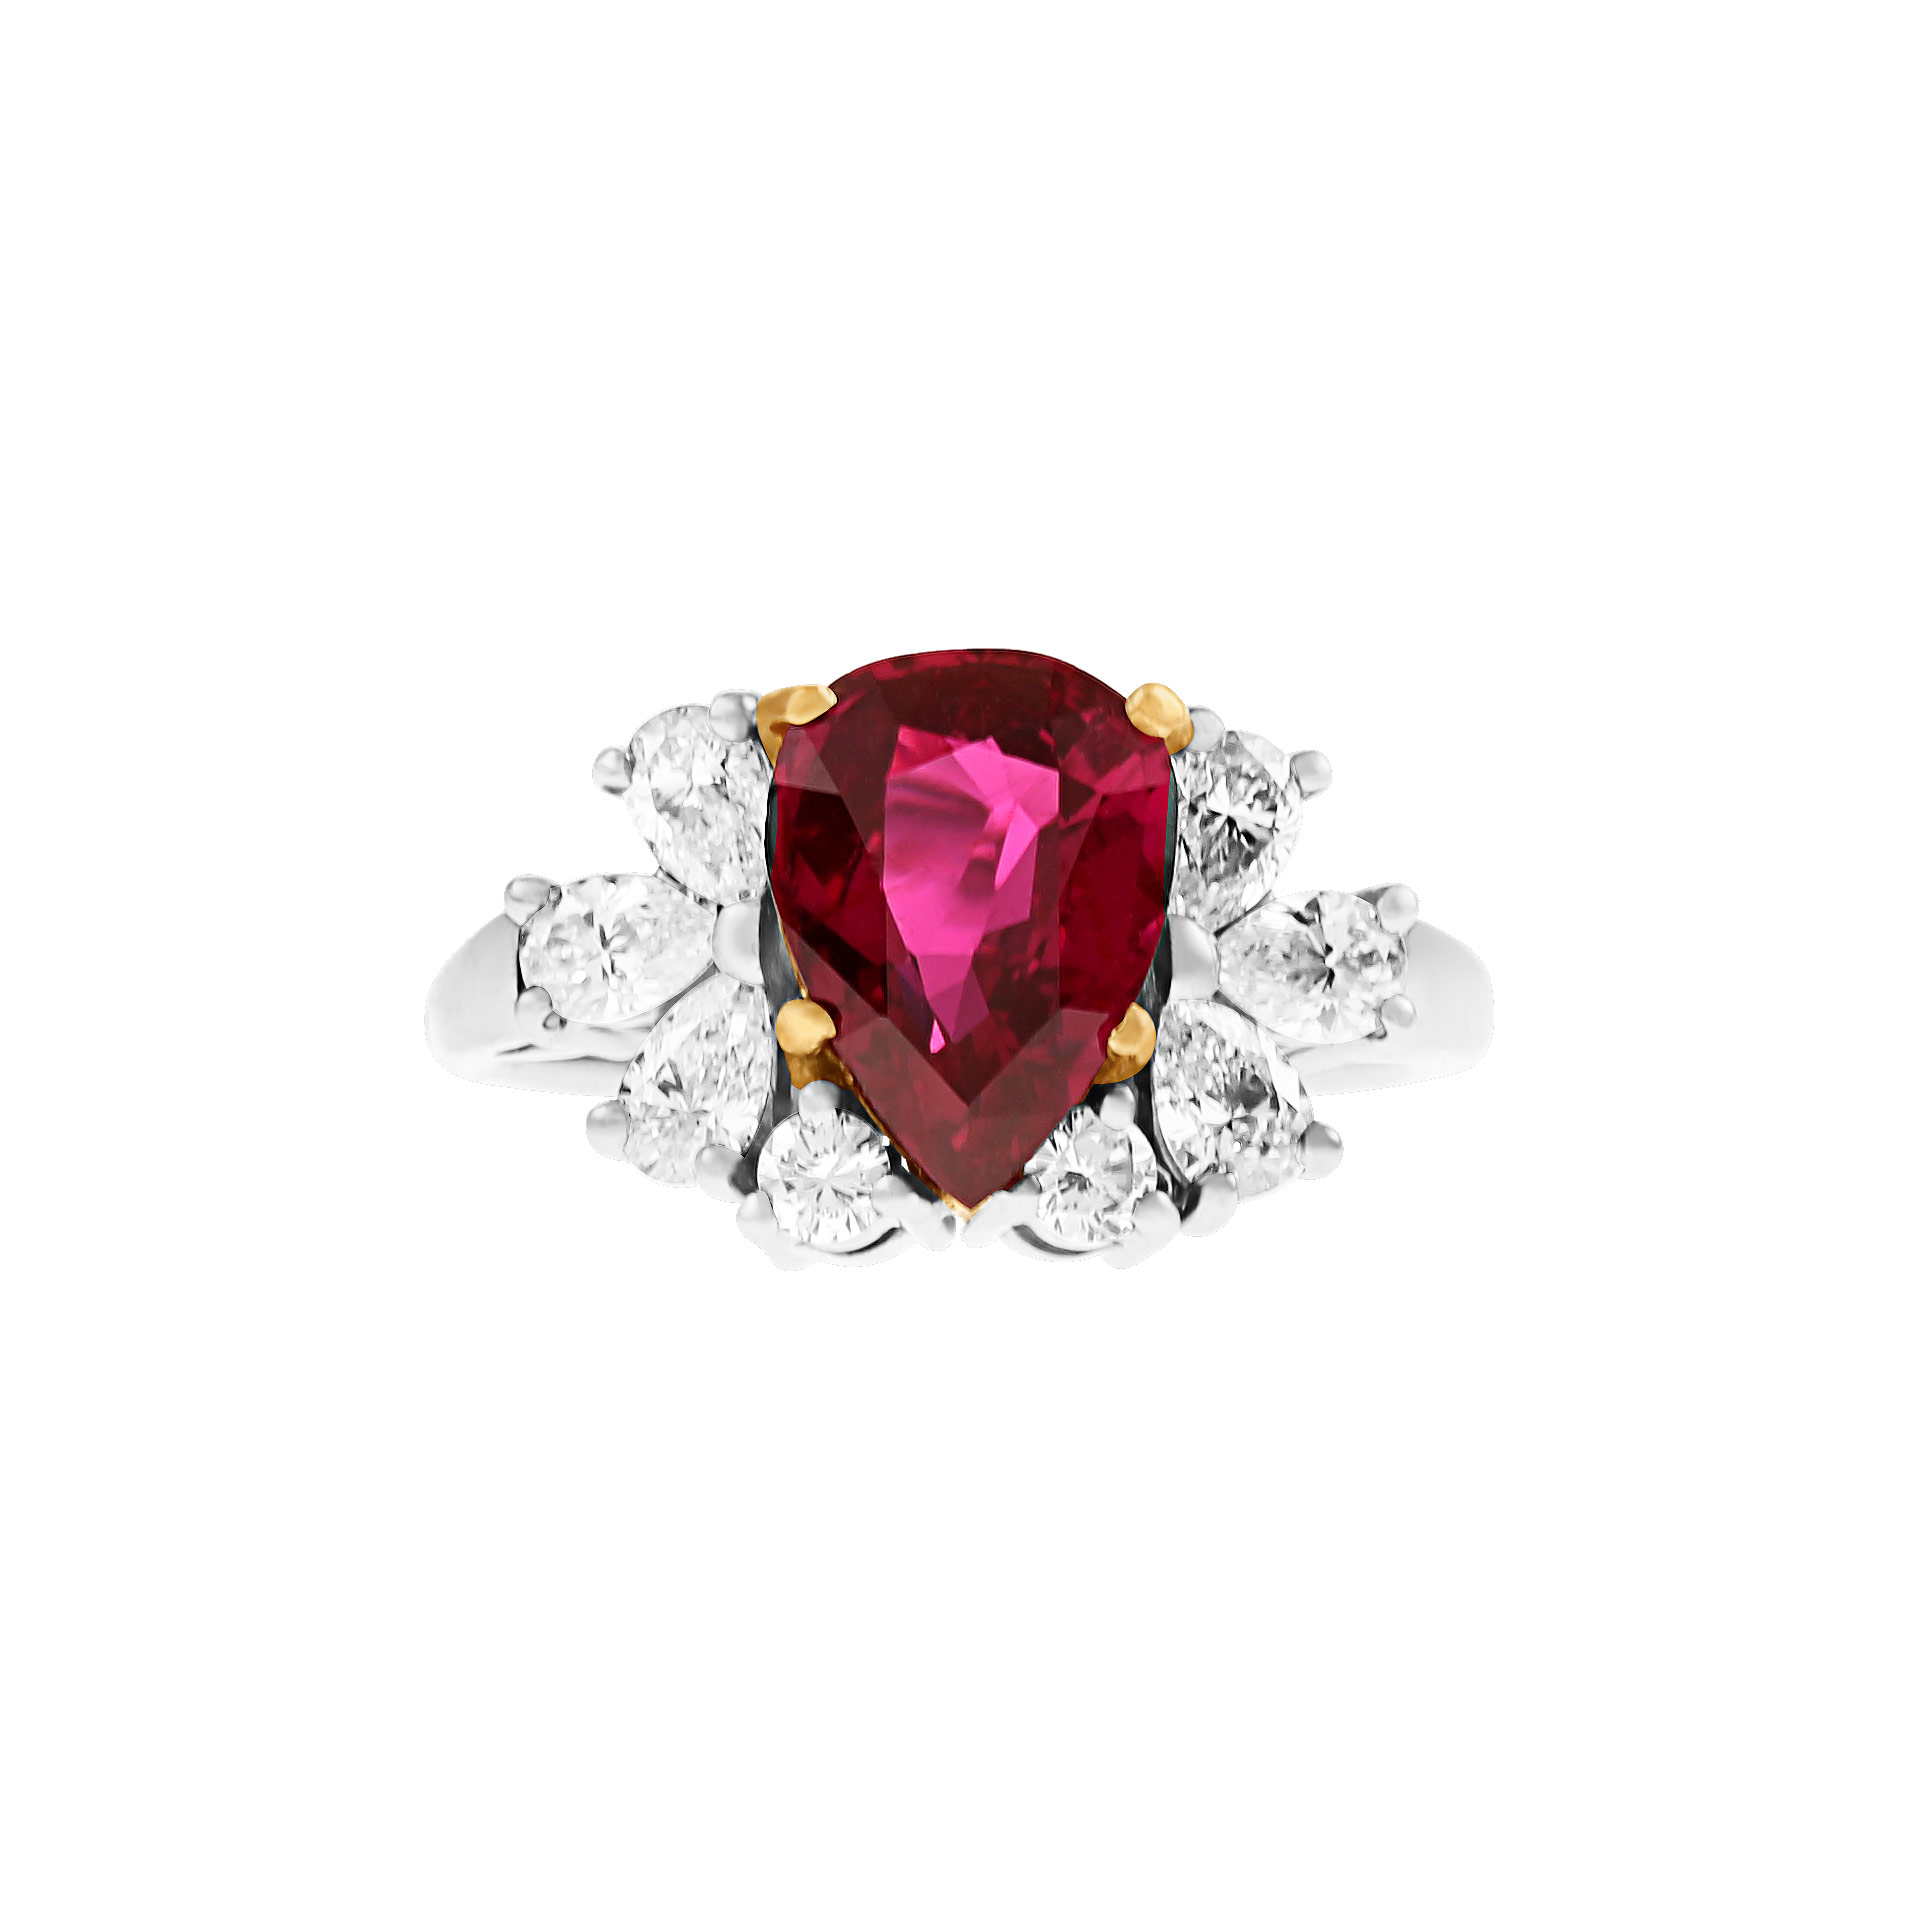 AGL certified Thai heated ruby ring in 18k & platinum. 2.83 carat pear shaped ruby